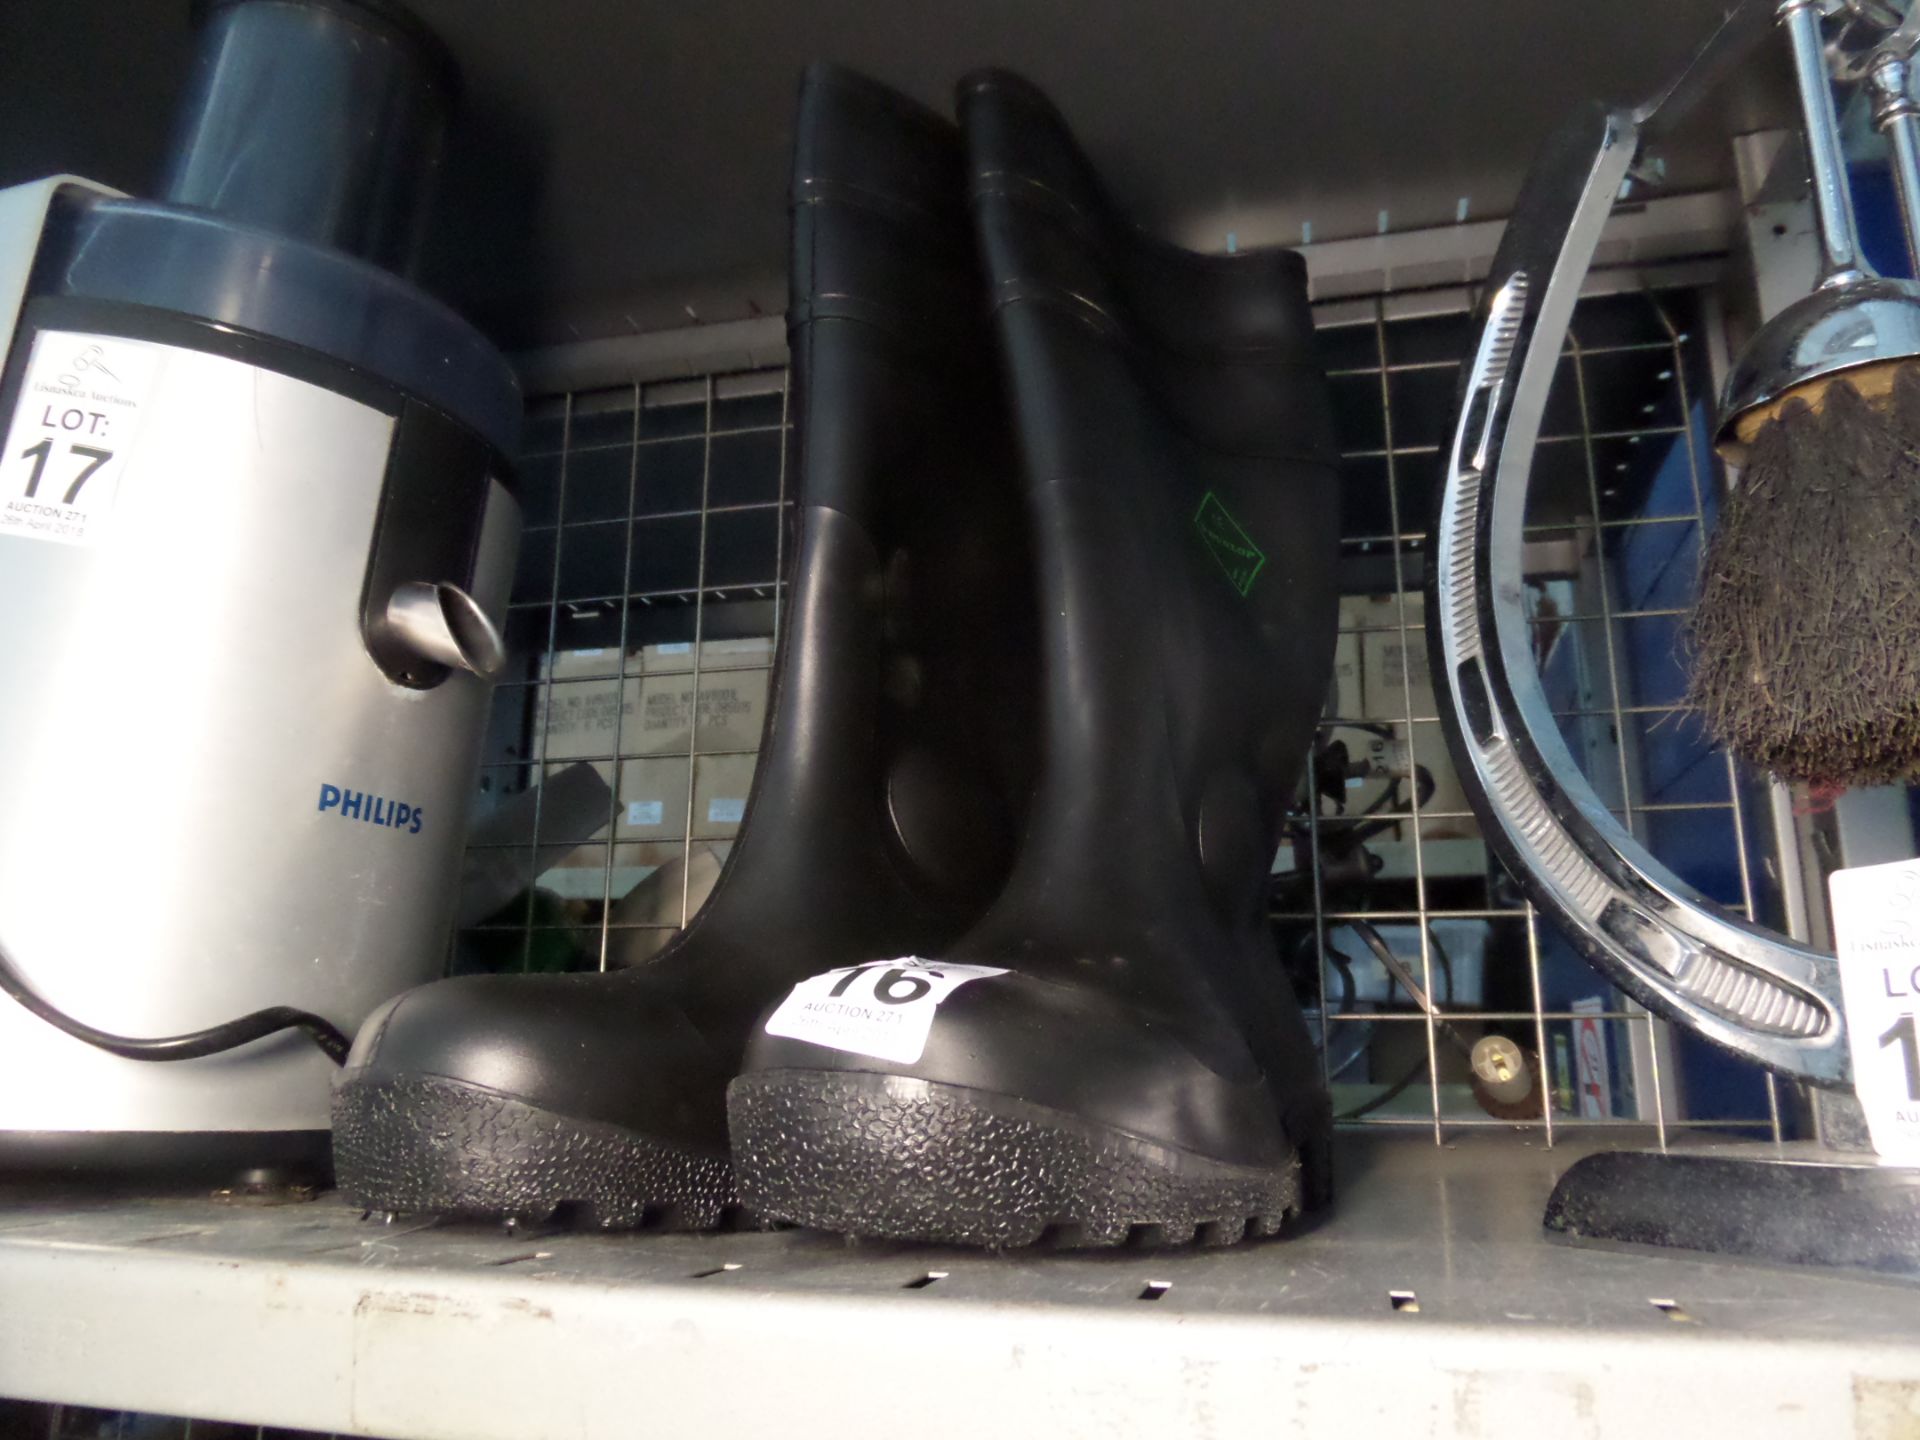 NEW DUNLOP WELLIES SIZE 3 - Image 2 of 3